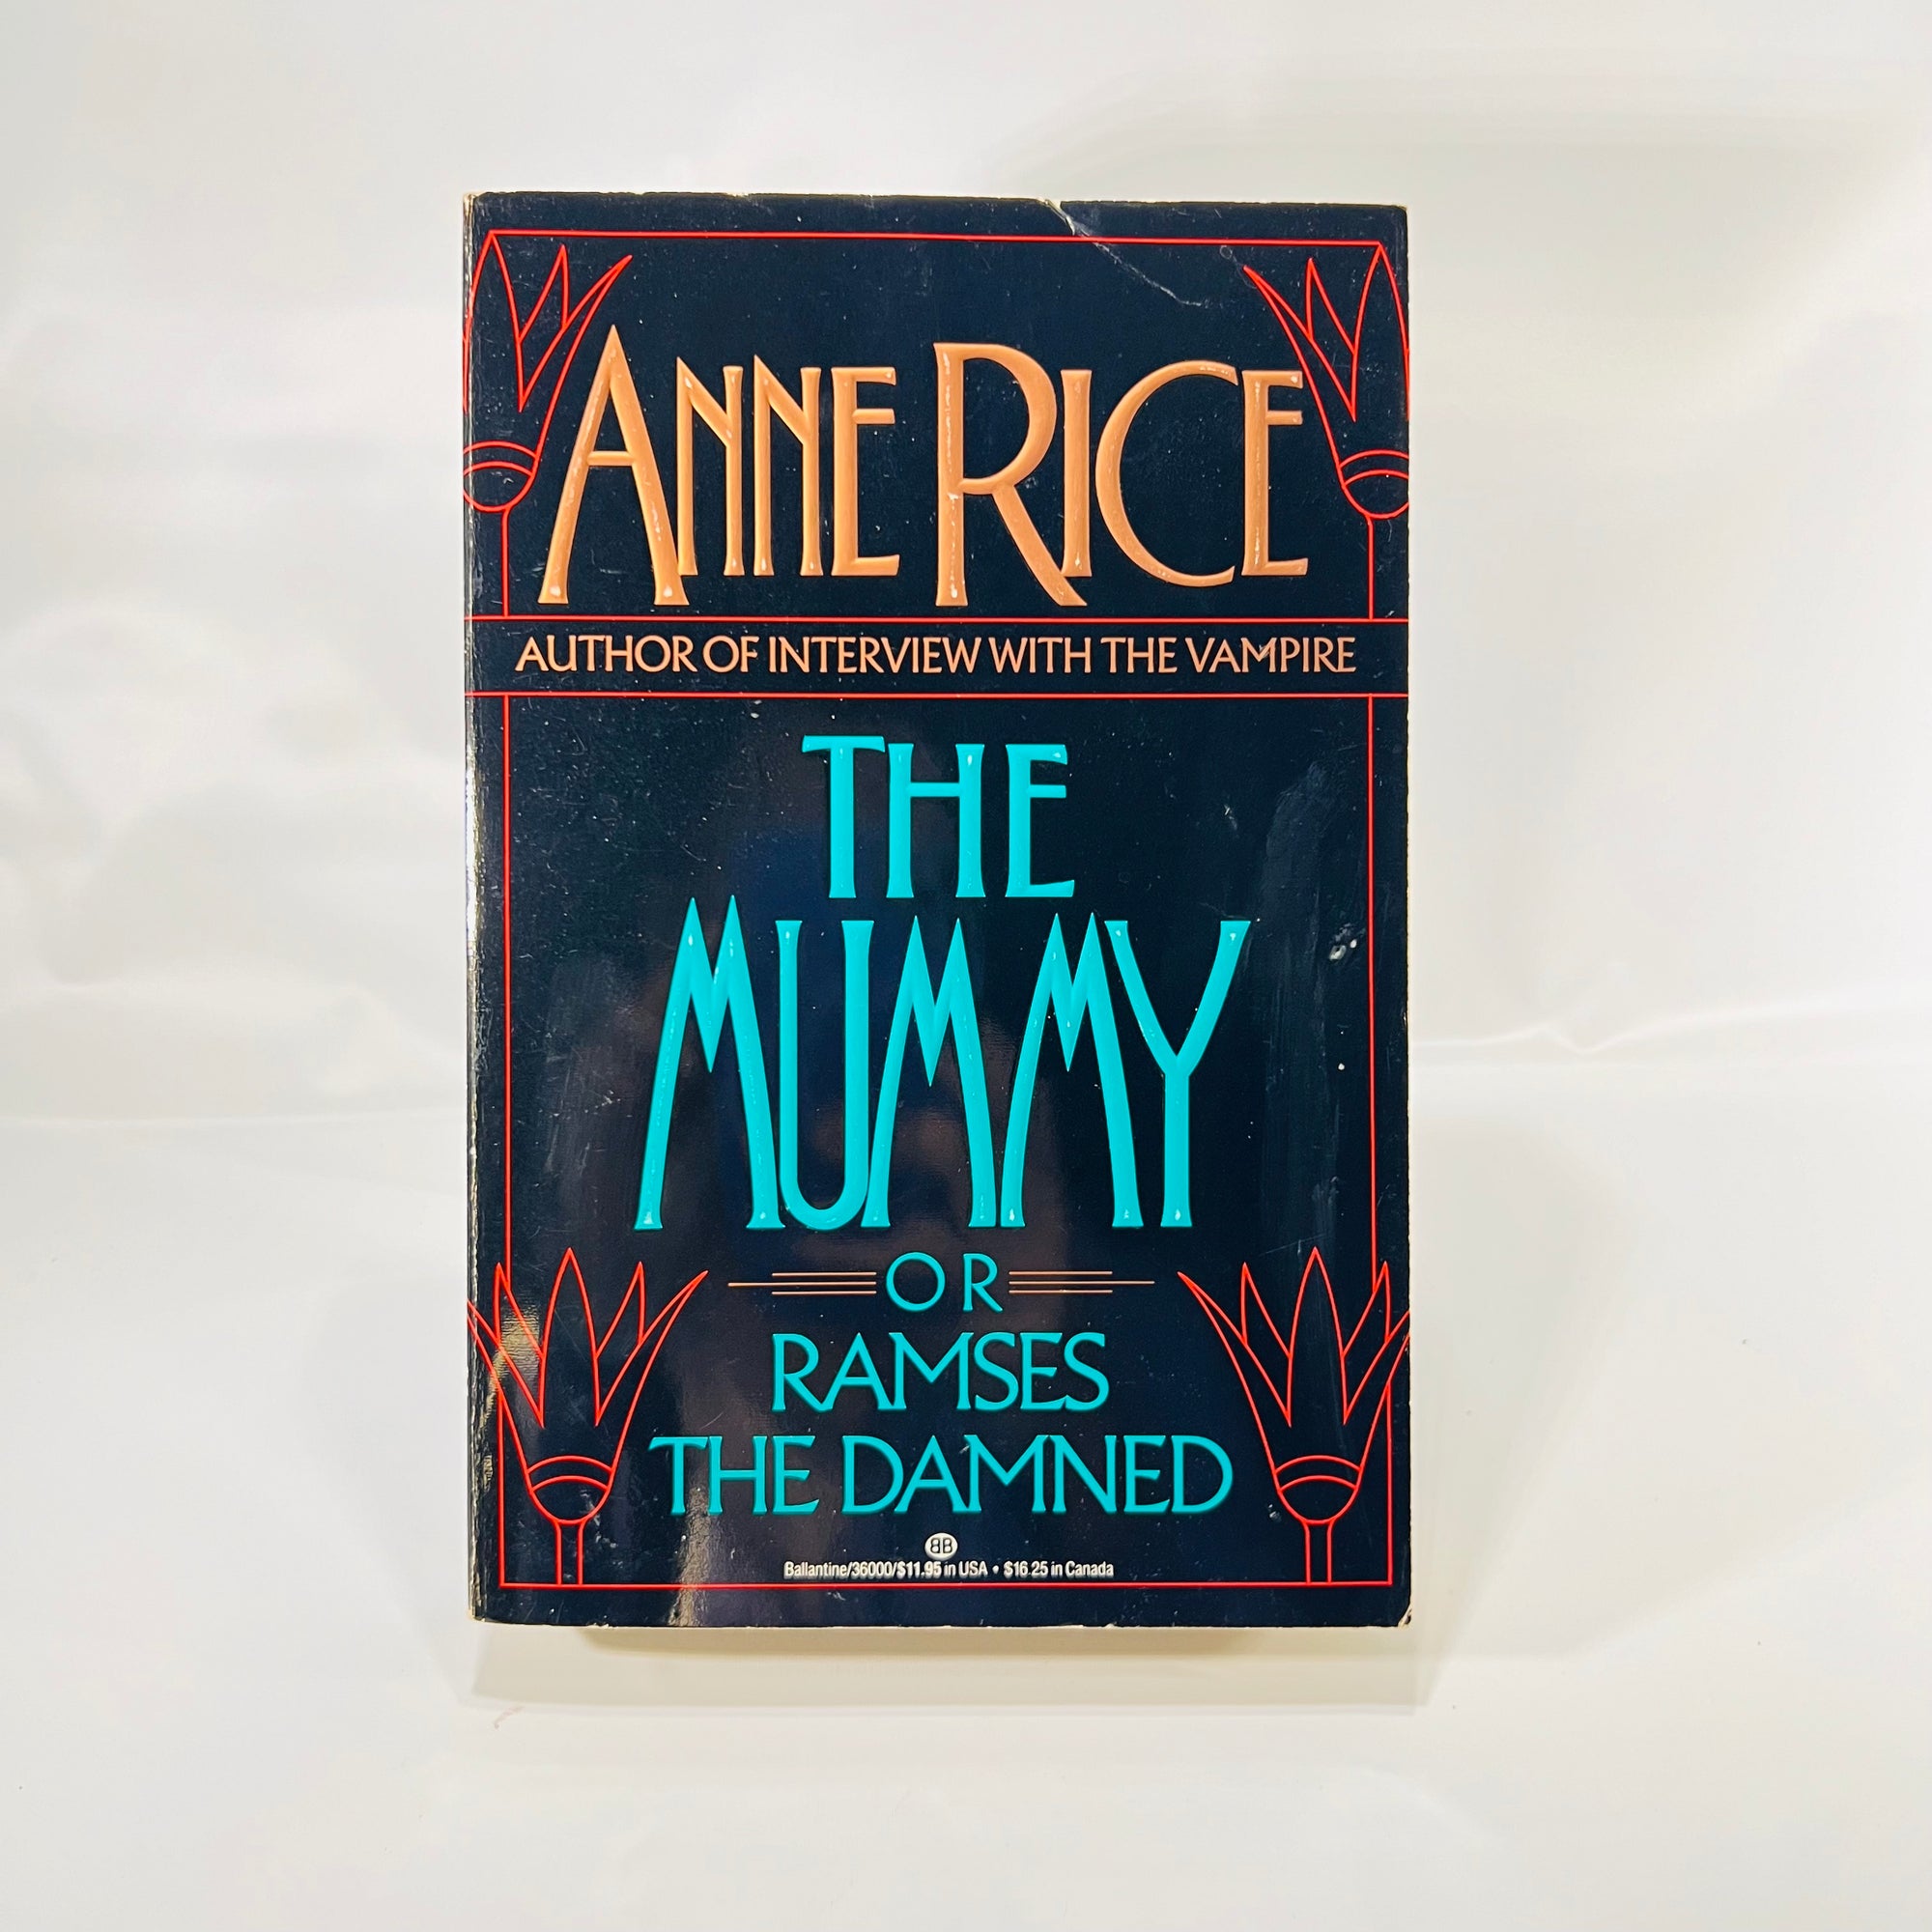 The Mummy or Ramses the Dammed by Anne Rice 1989 First Edition Paperback Ballantine Books